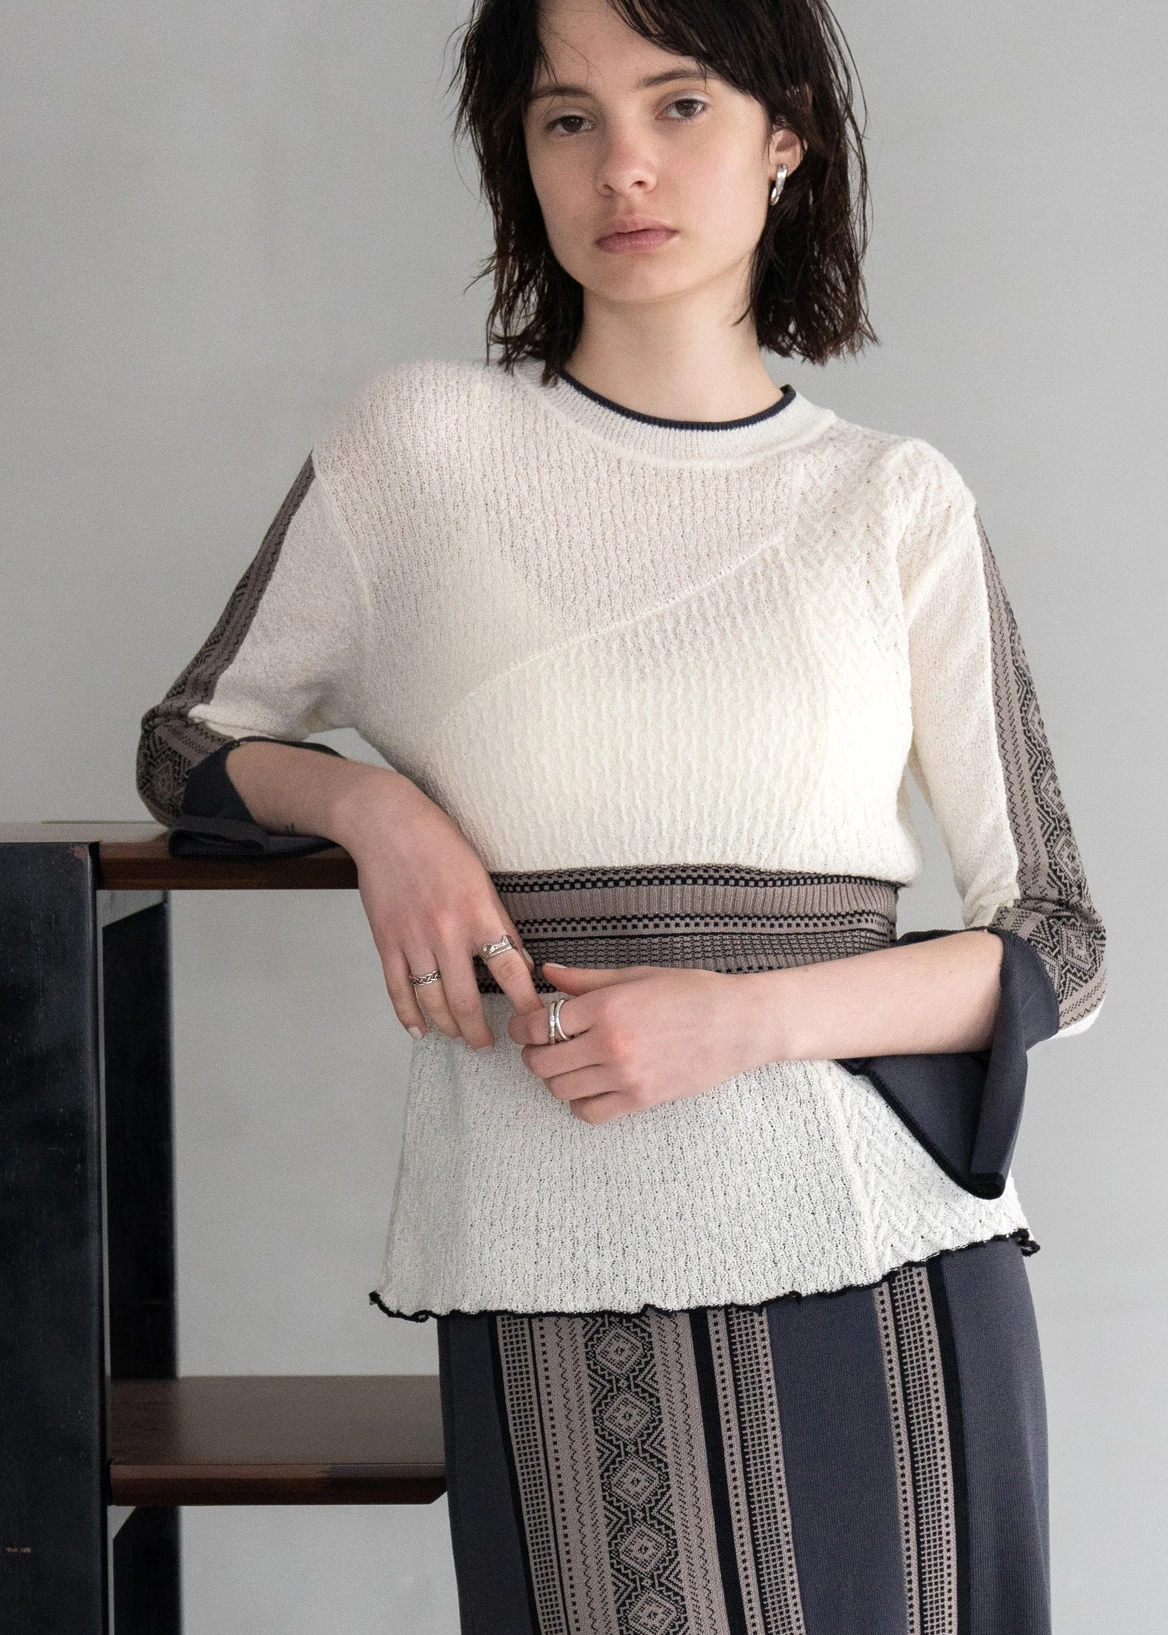 weave placement knit セットアップwillfully www.krzysztofbialy.com